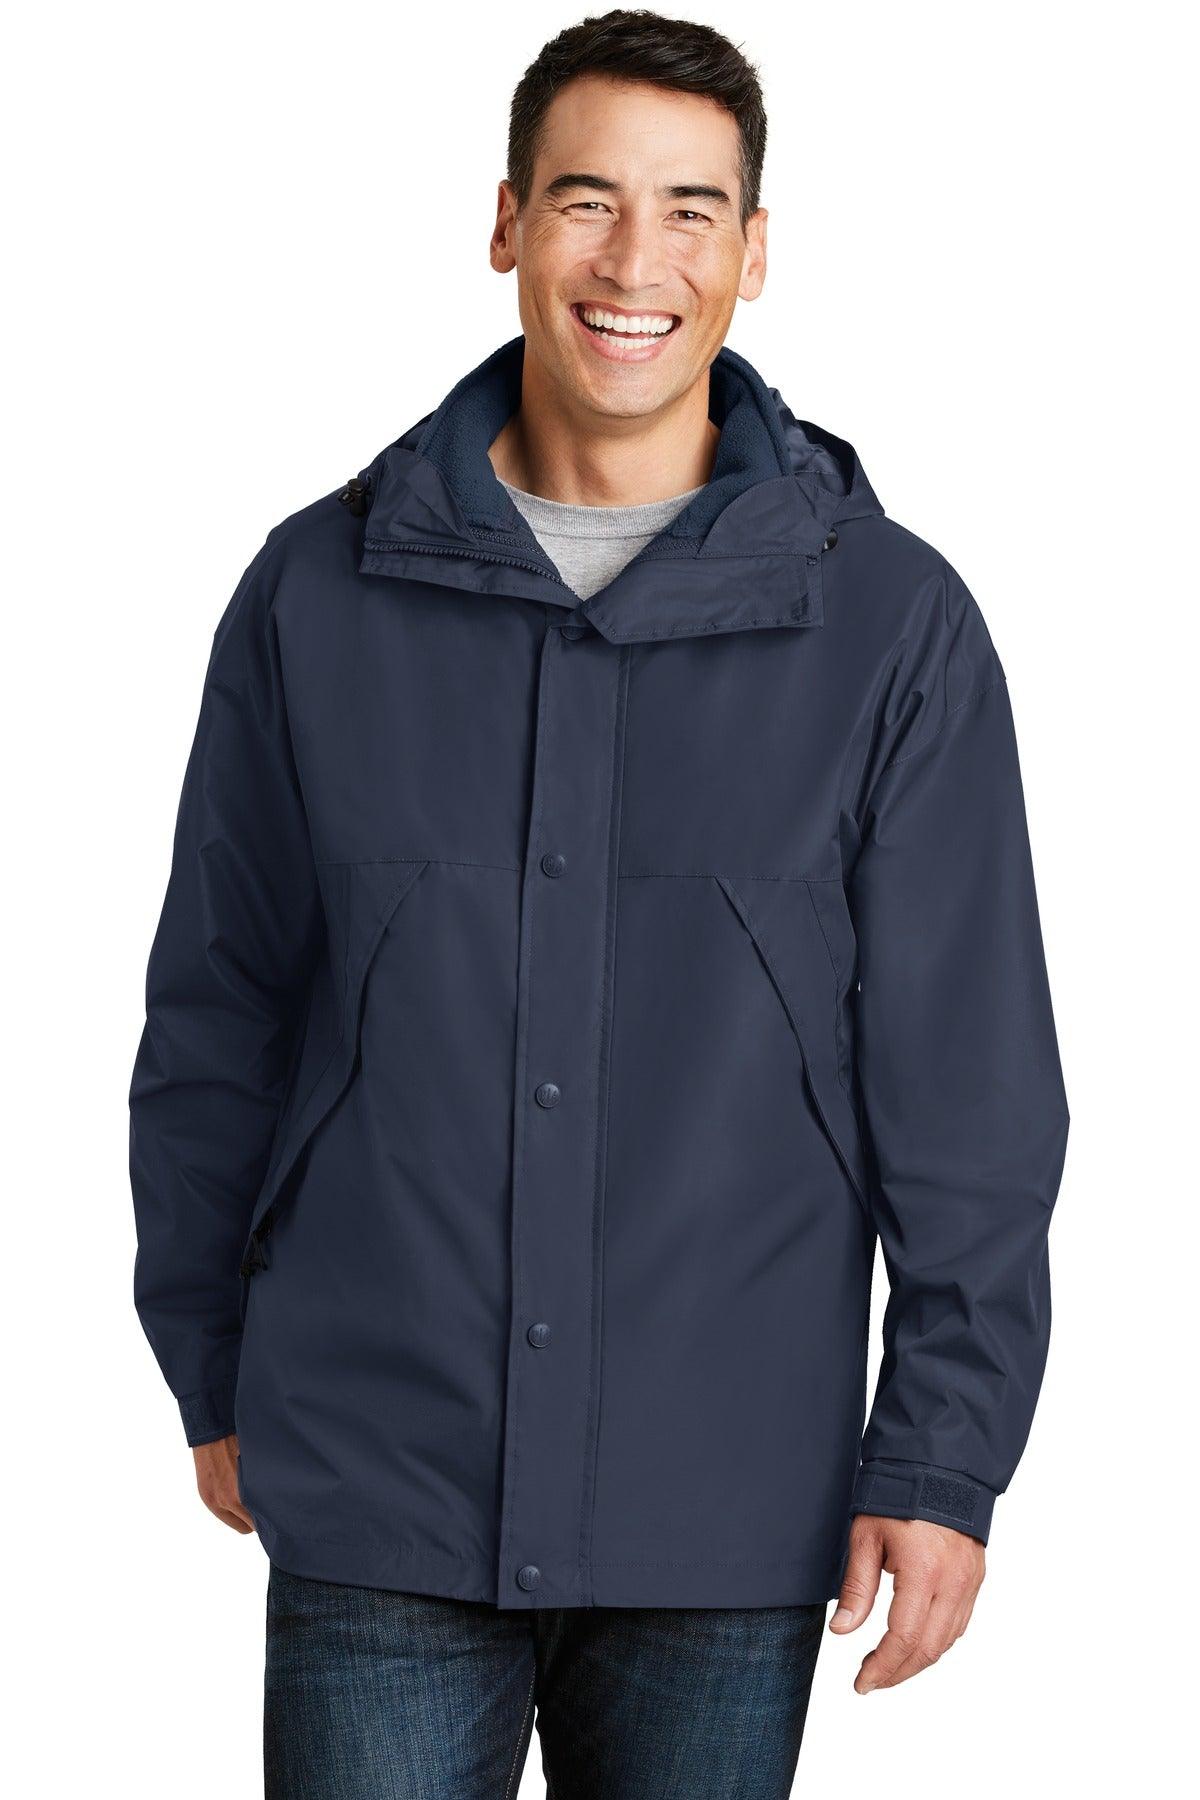 Port Authority 3-in-1 Jacket. J777 - Dresses Max